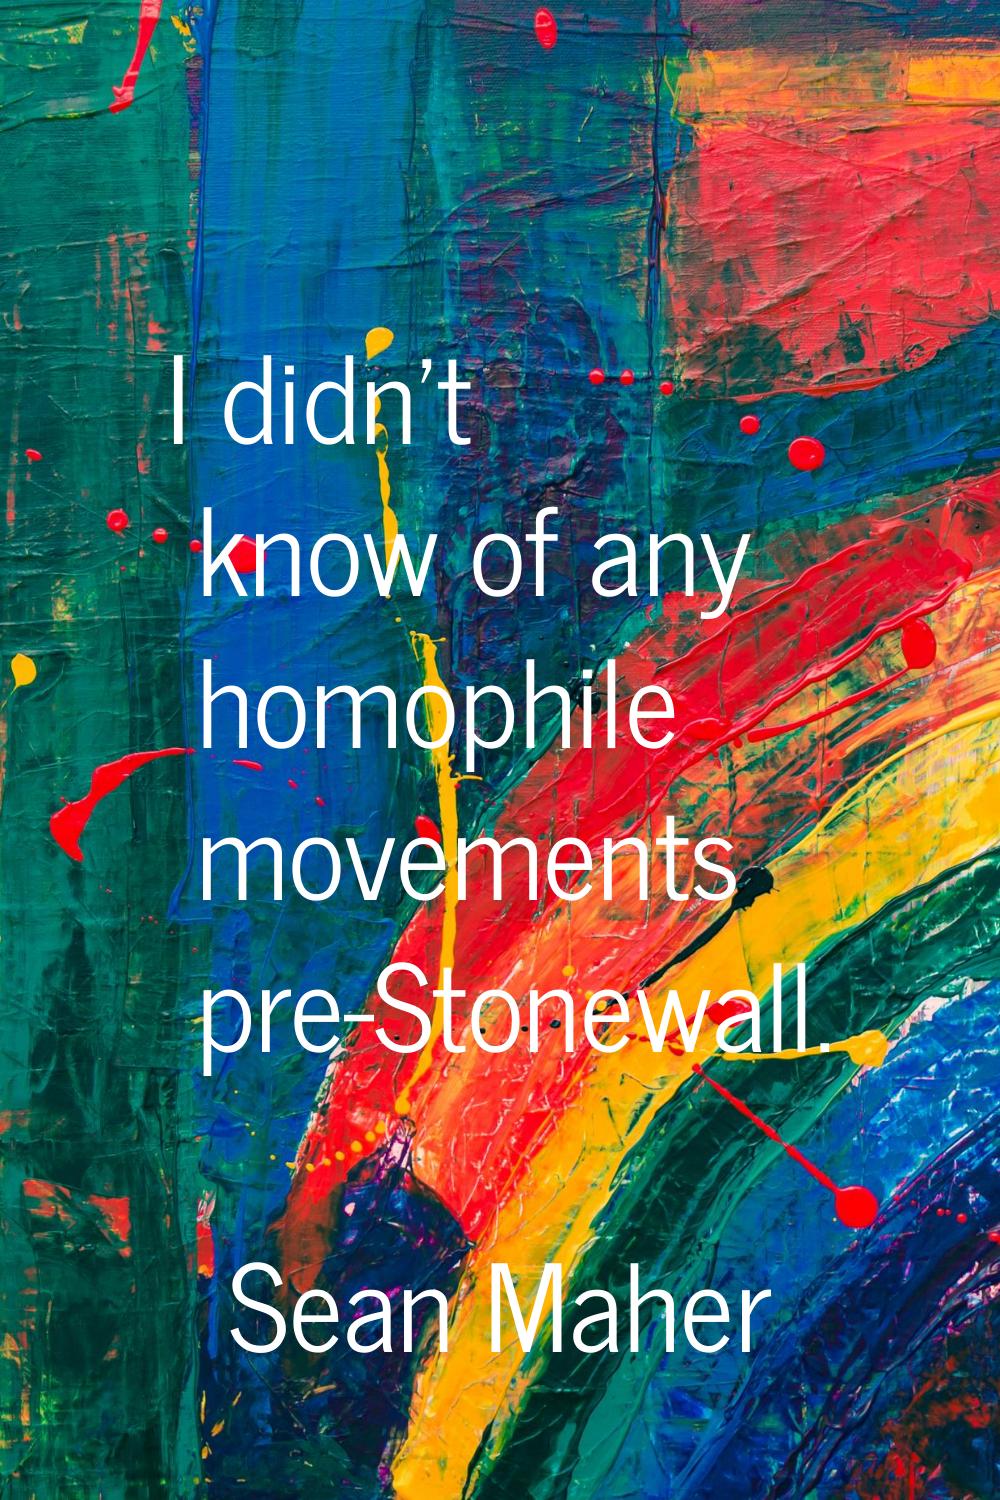 I didn't know of any homophile movements pre-Stonewall.